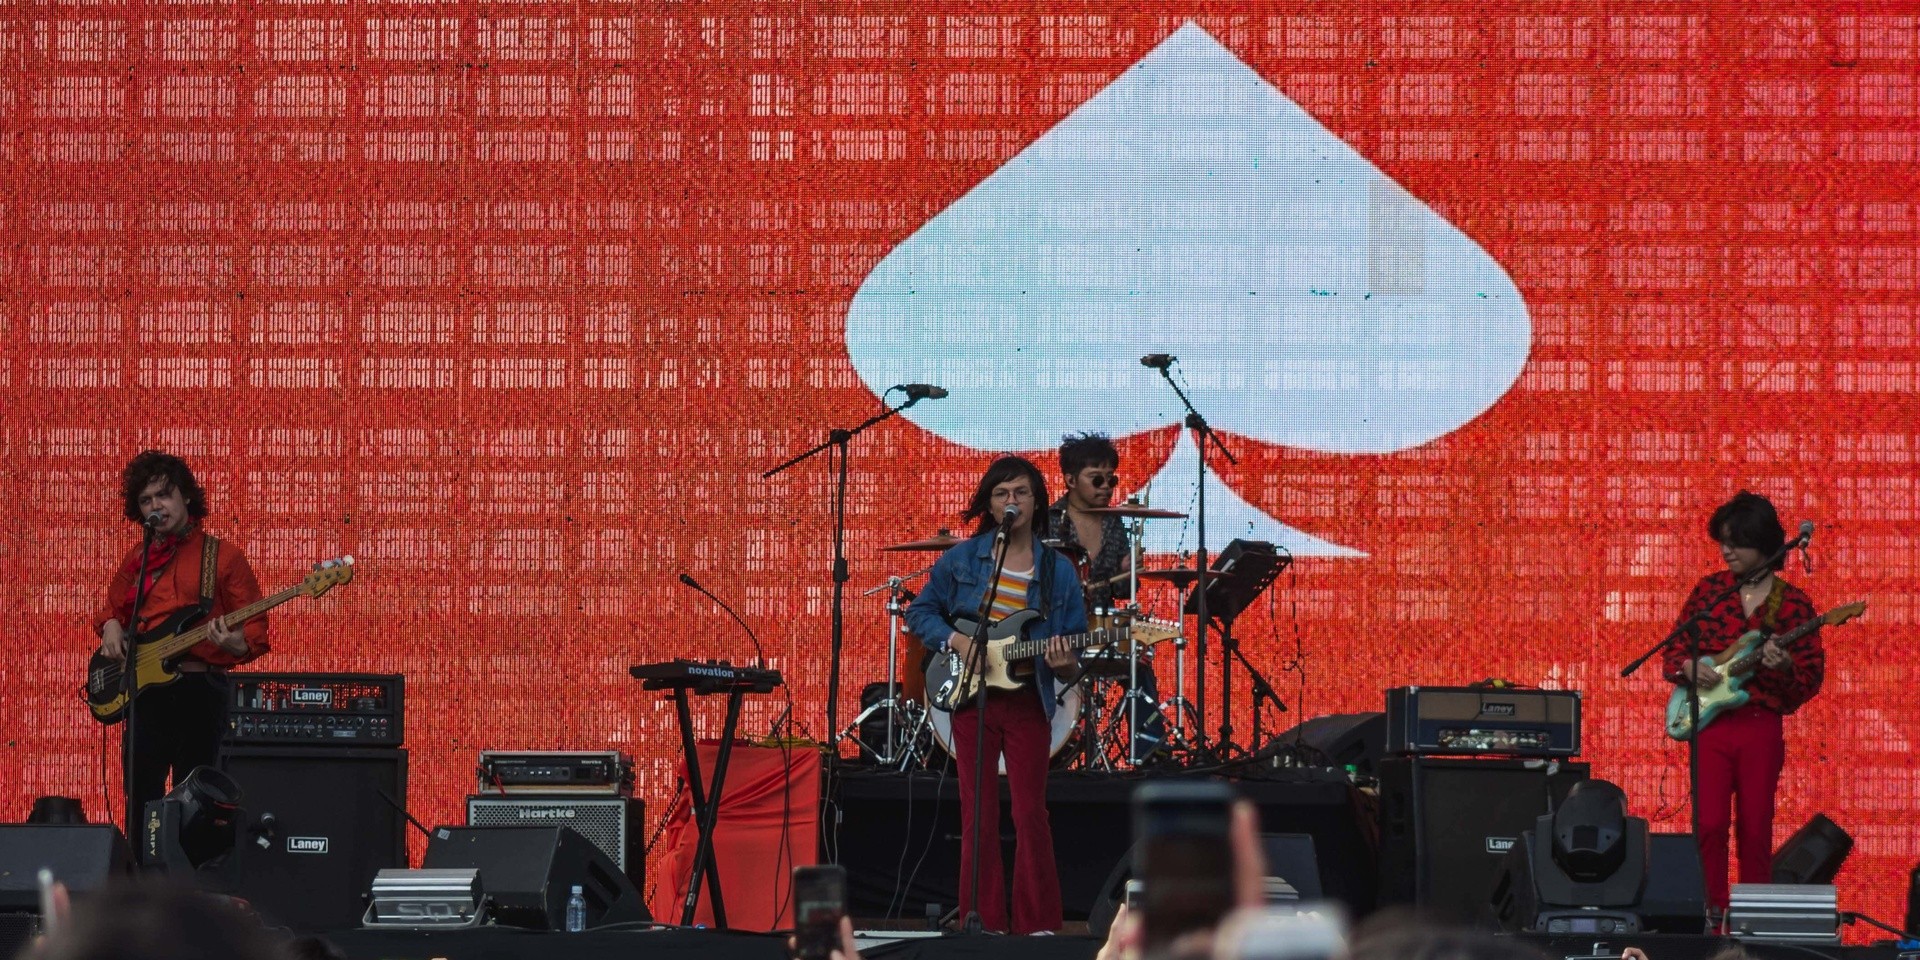 "IV of Spades is not disbanding," the band assures fans in official statement